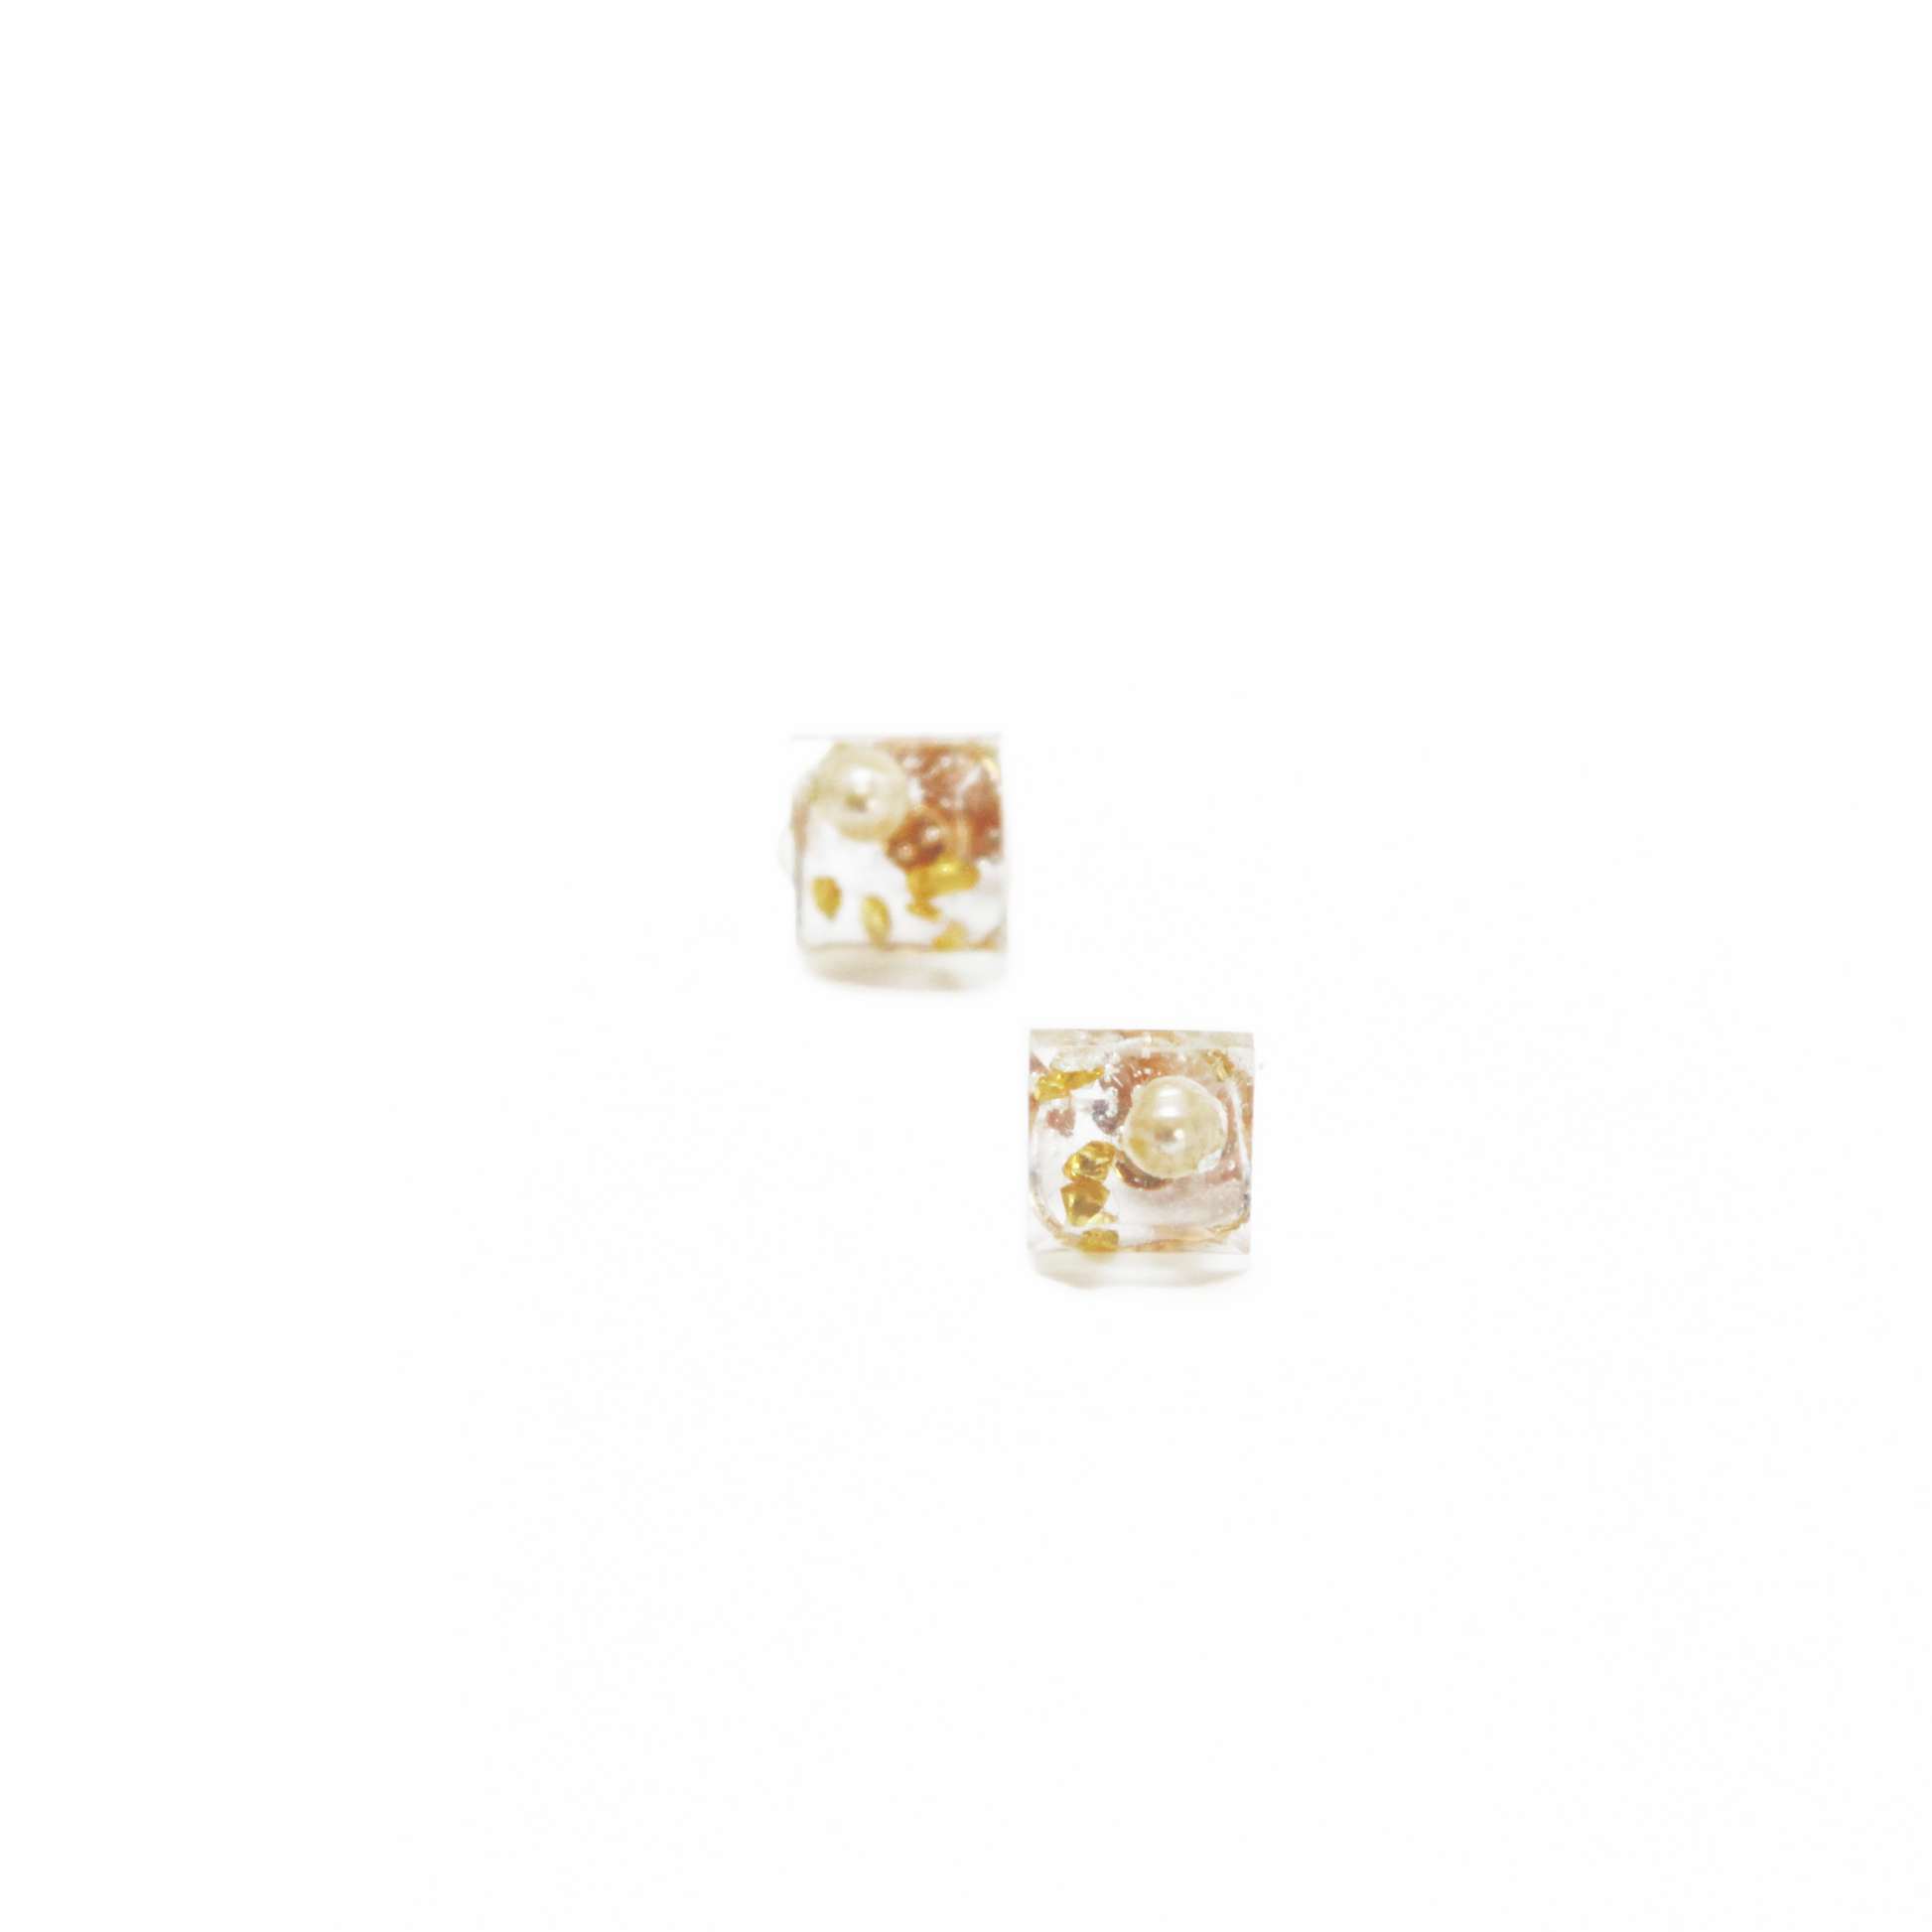 Transparent Square resin art earring with freshwater pearl and golden stones, 14k gold filled by Hikaru Pearl